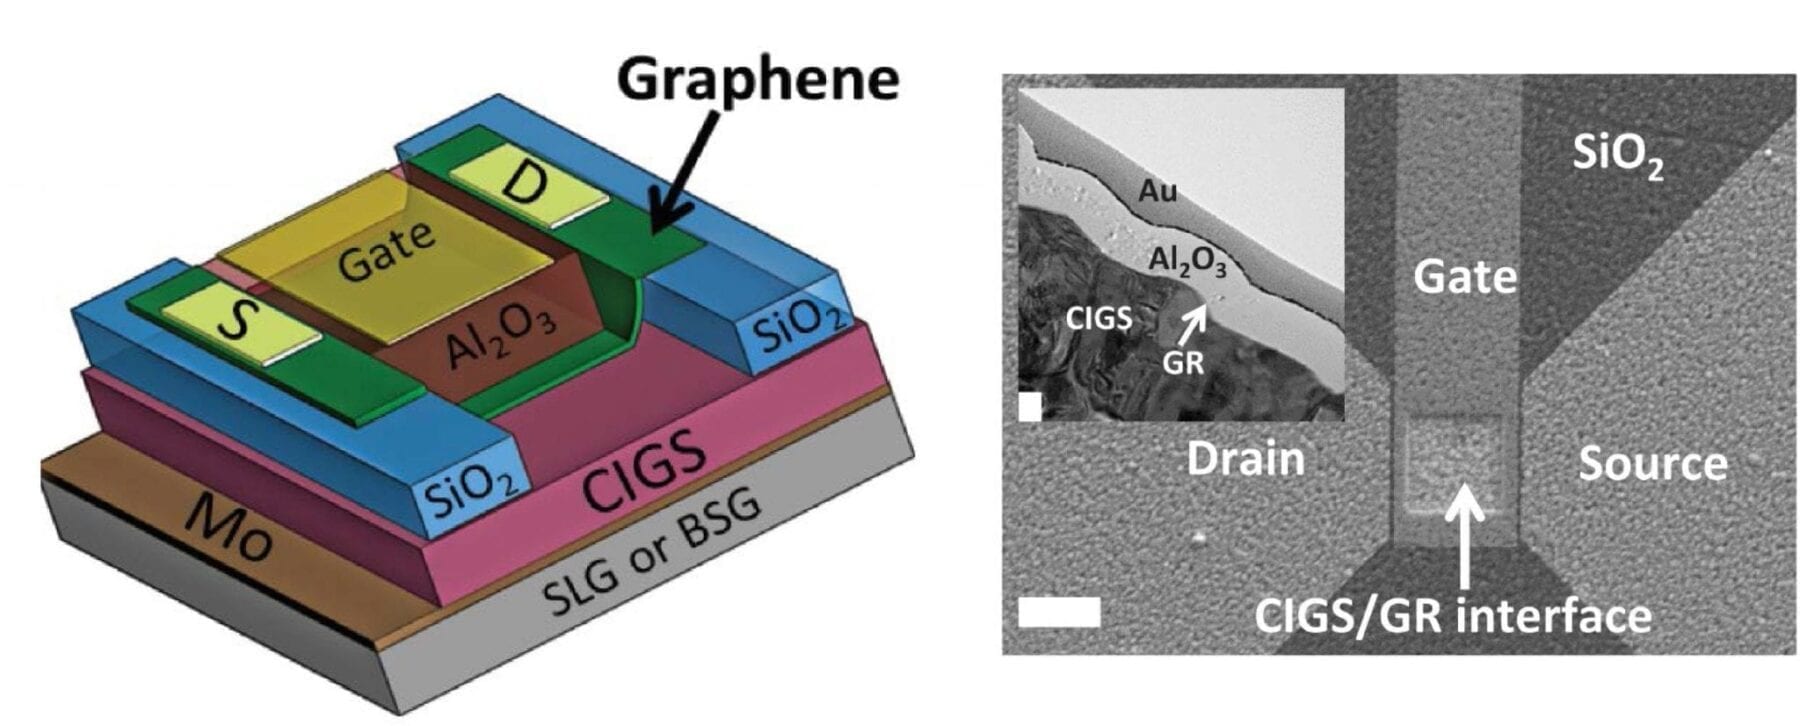 Scientists' use of common glass to optimize graphene's electronic properties could improve technologies from flat screens to solar cells